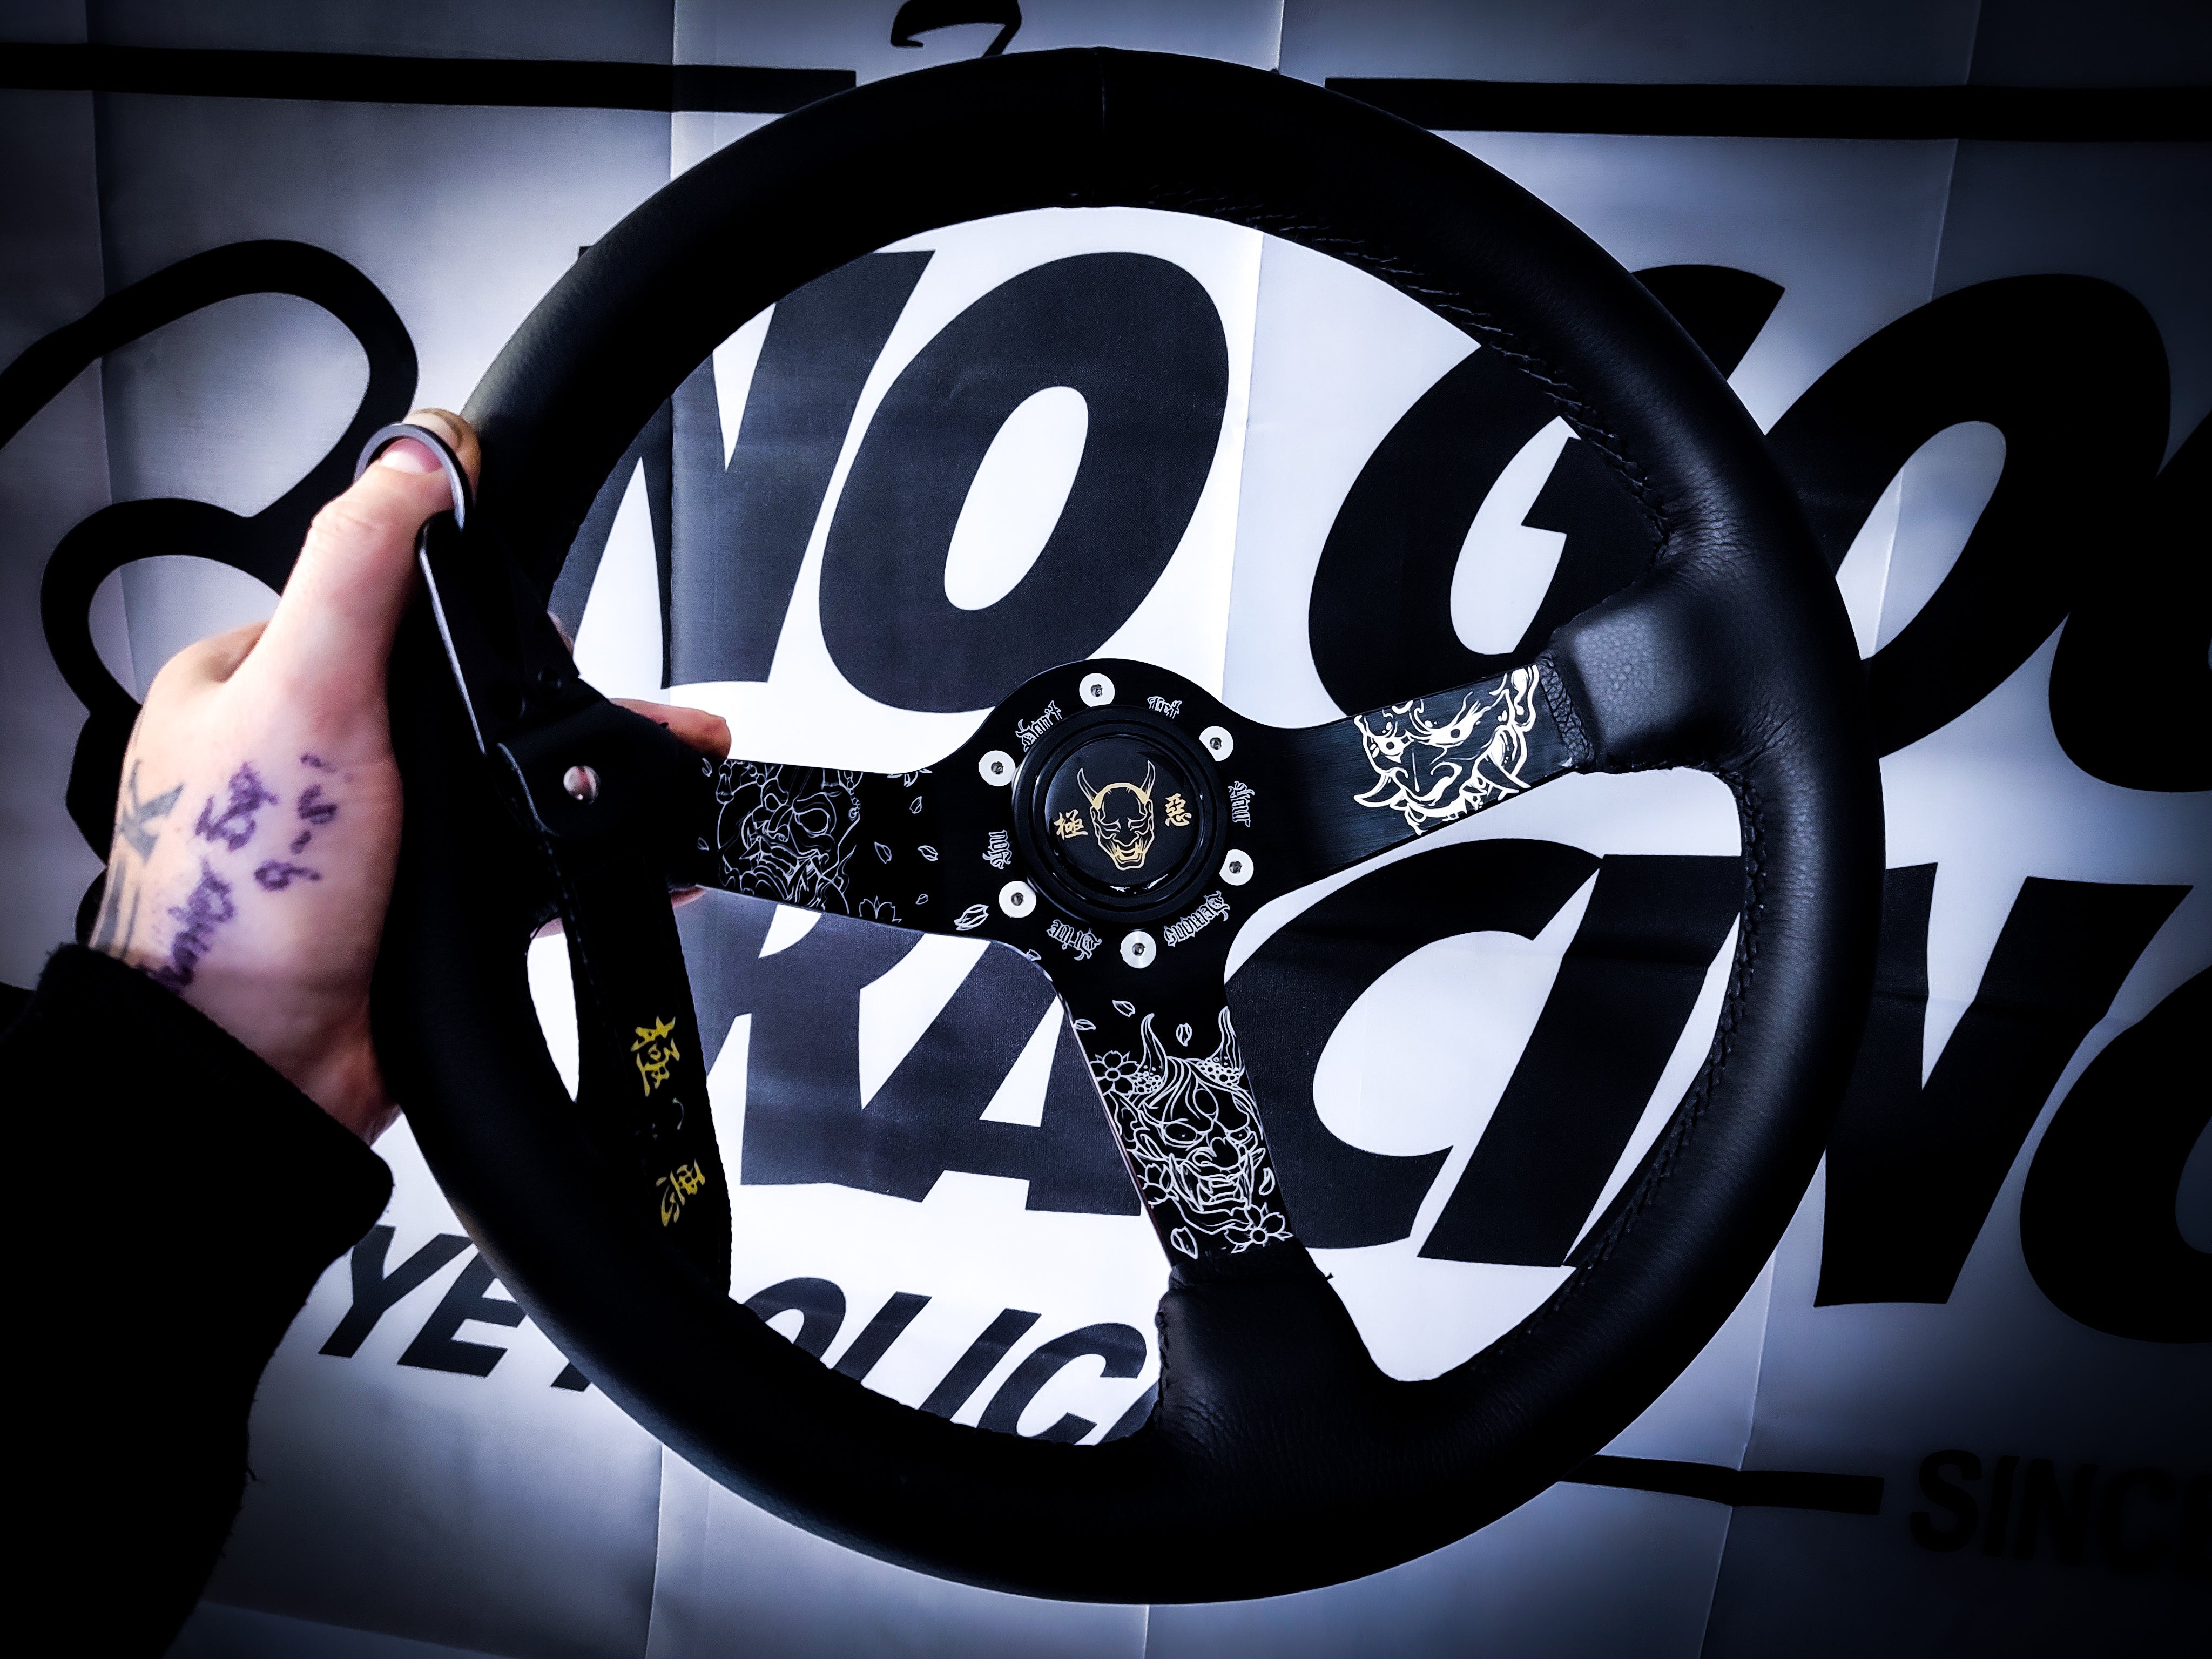 LIMITED "Don't Let Your Demons Drive You" Black Deep Dished Steering Wheel